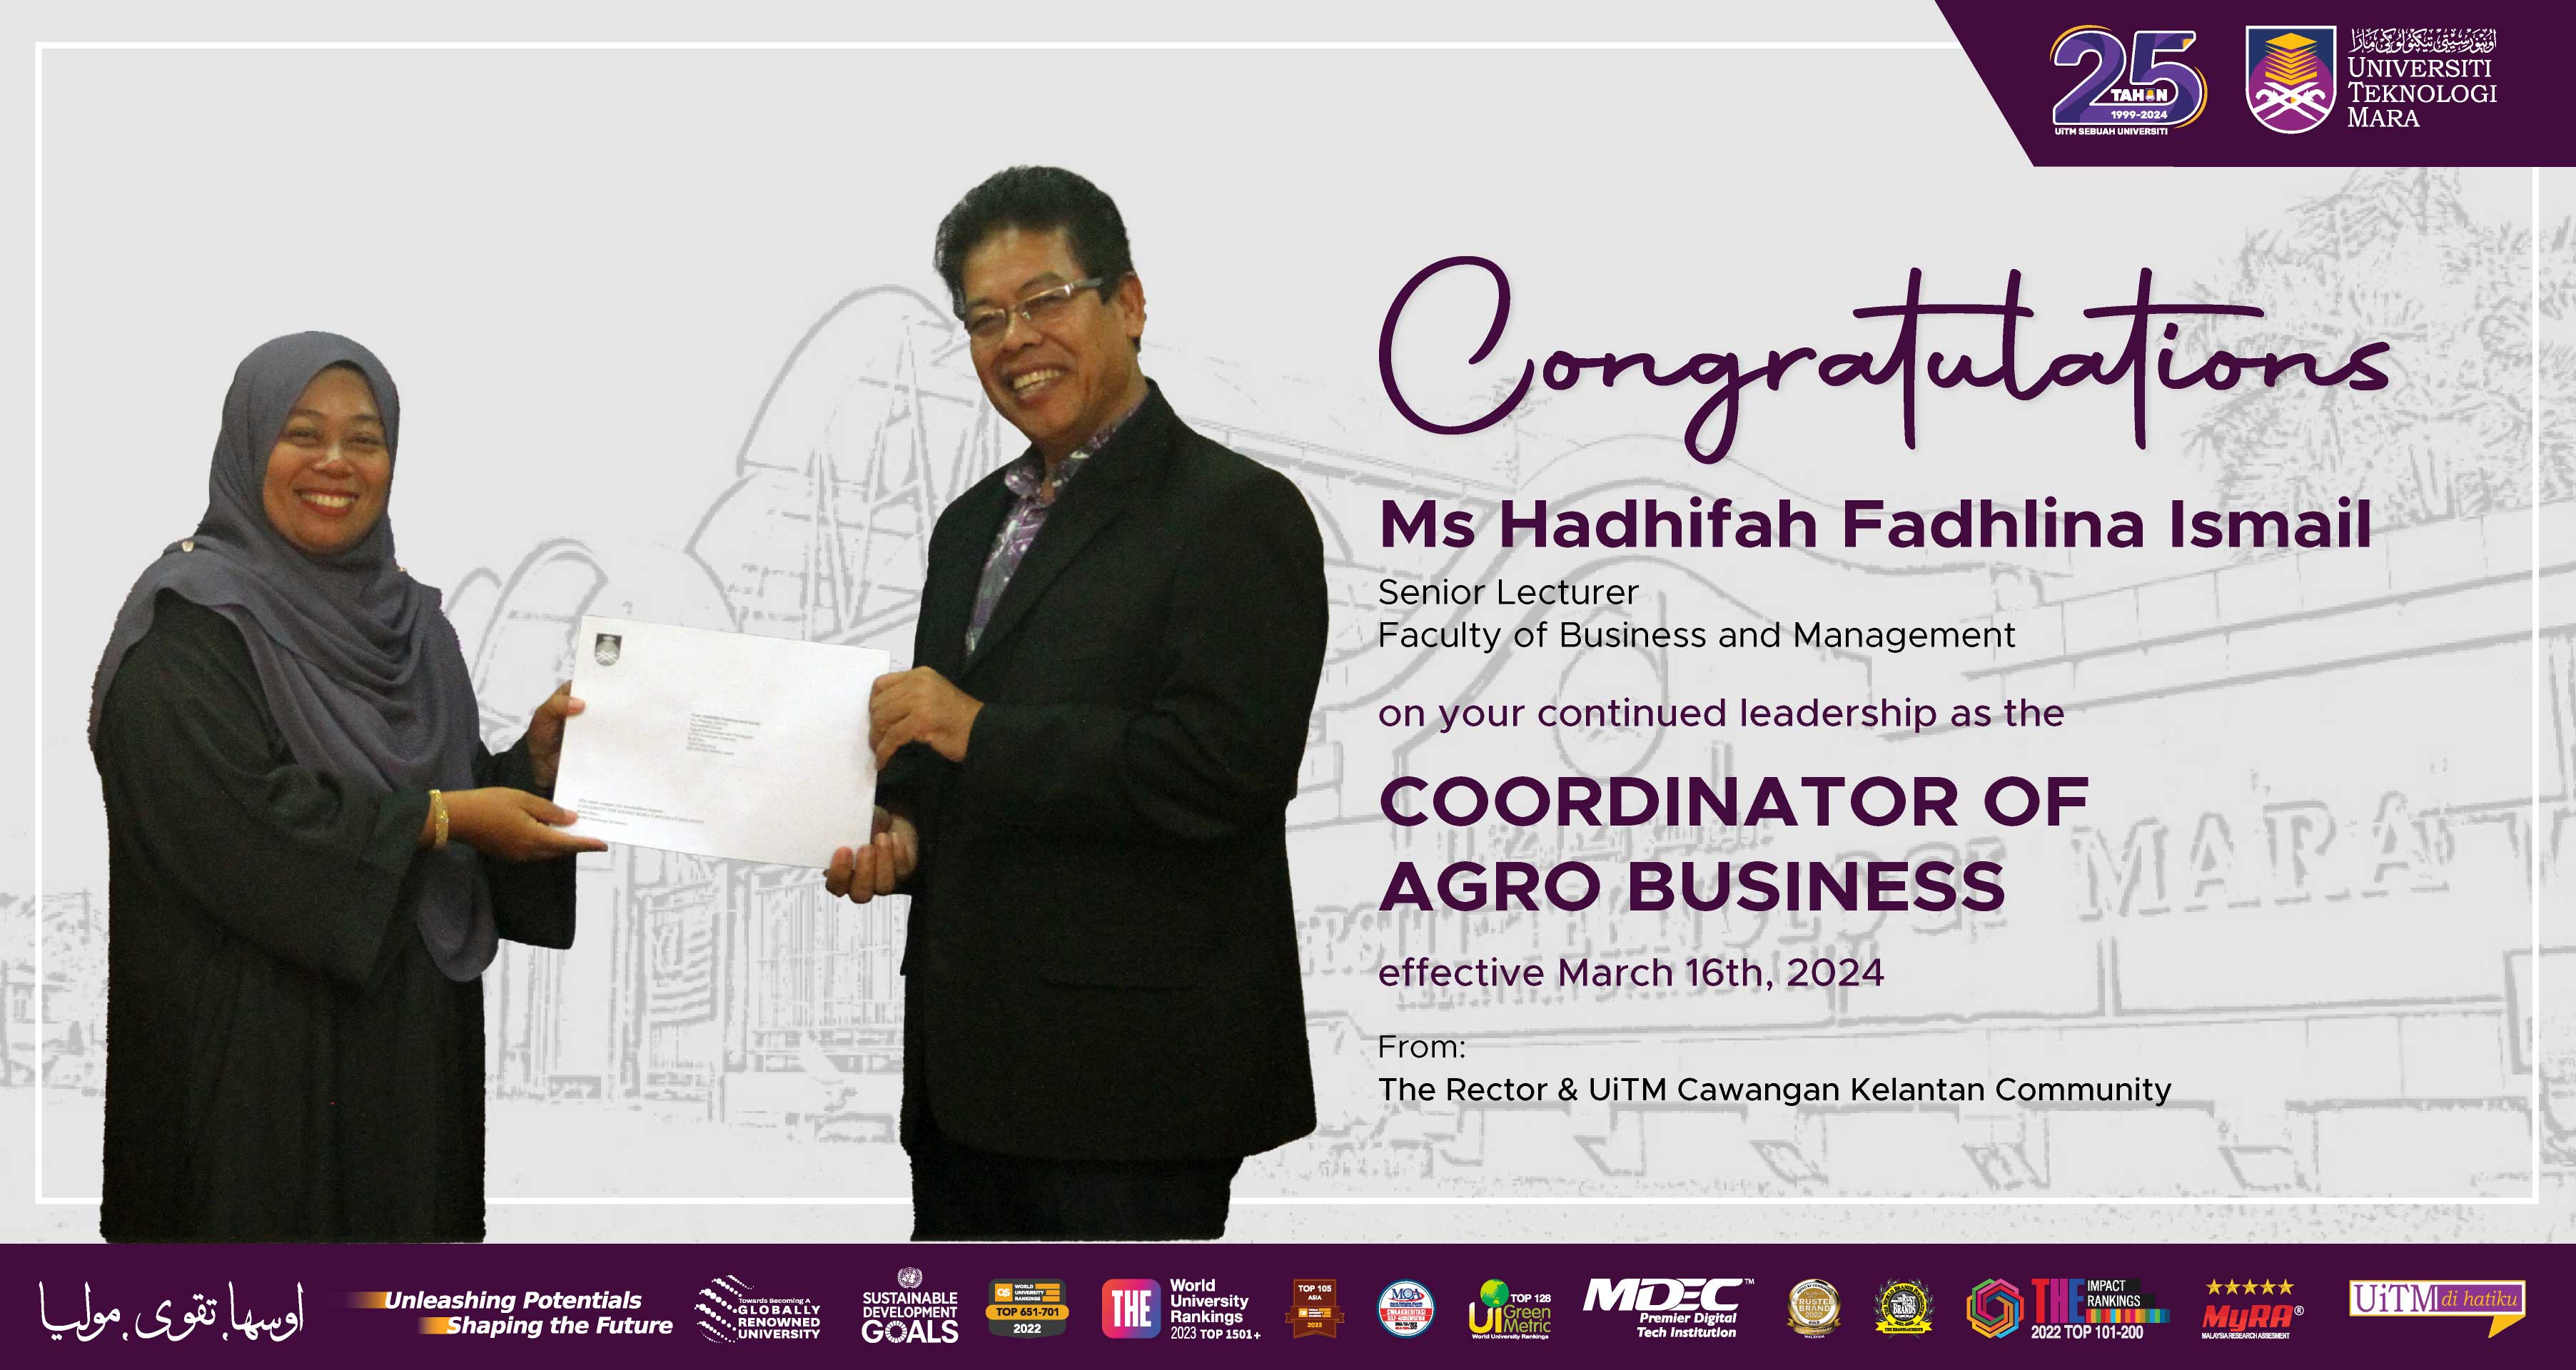 Congratulations!!!  Ms Hadhifah Fadhlina Ismail,  Coordinator of Agro Business